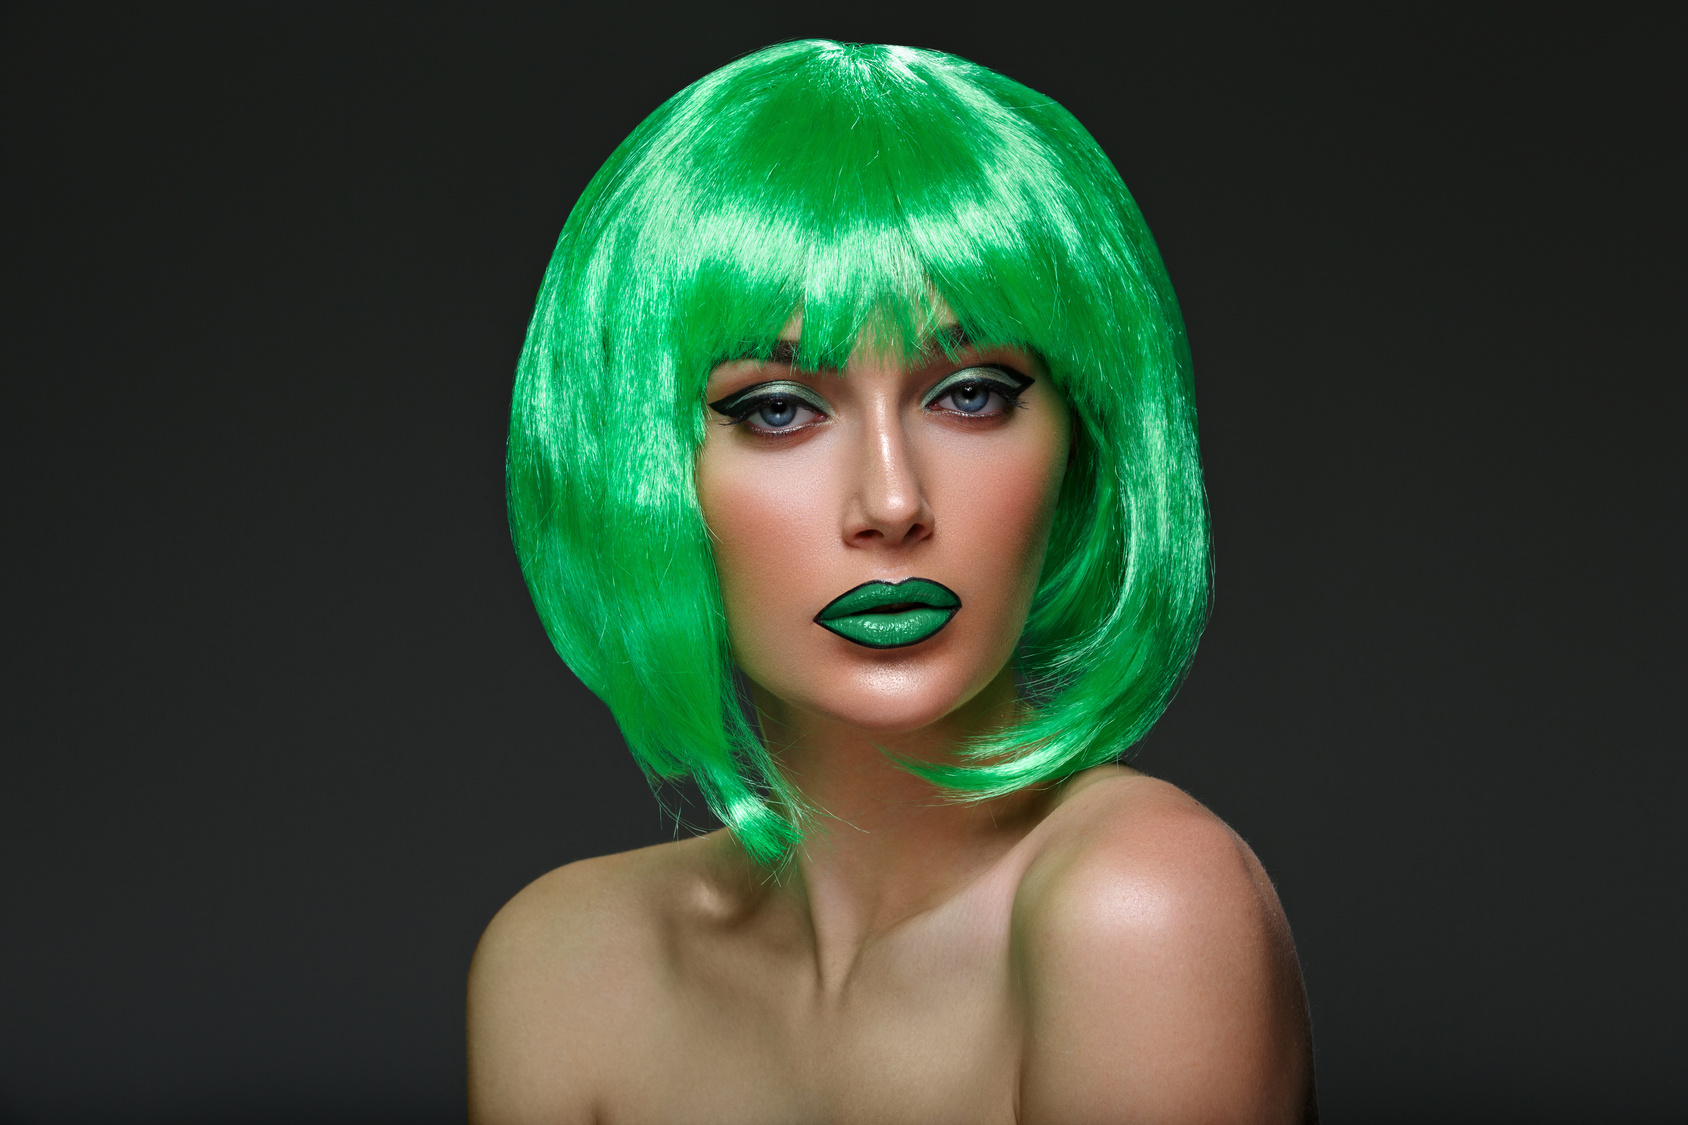 Beautiful young woman with glowing skin, fashion make-up in short green hair wig. Beauty shot on black background. Copy space.